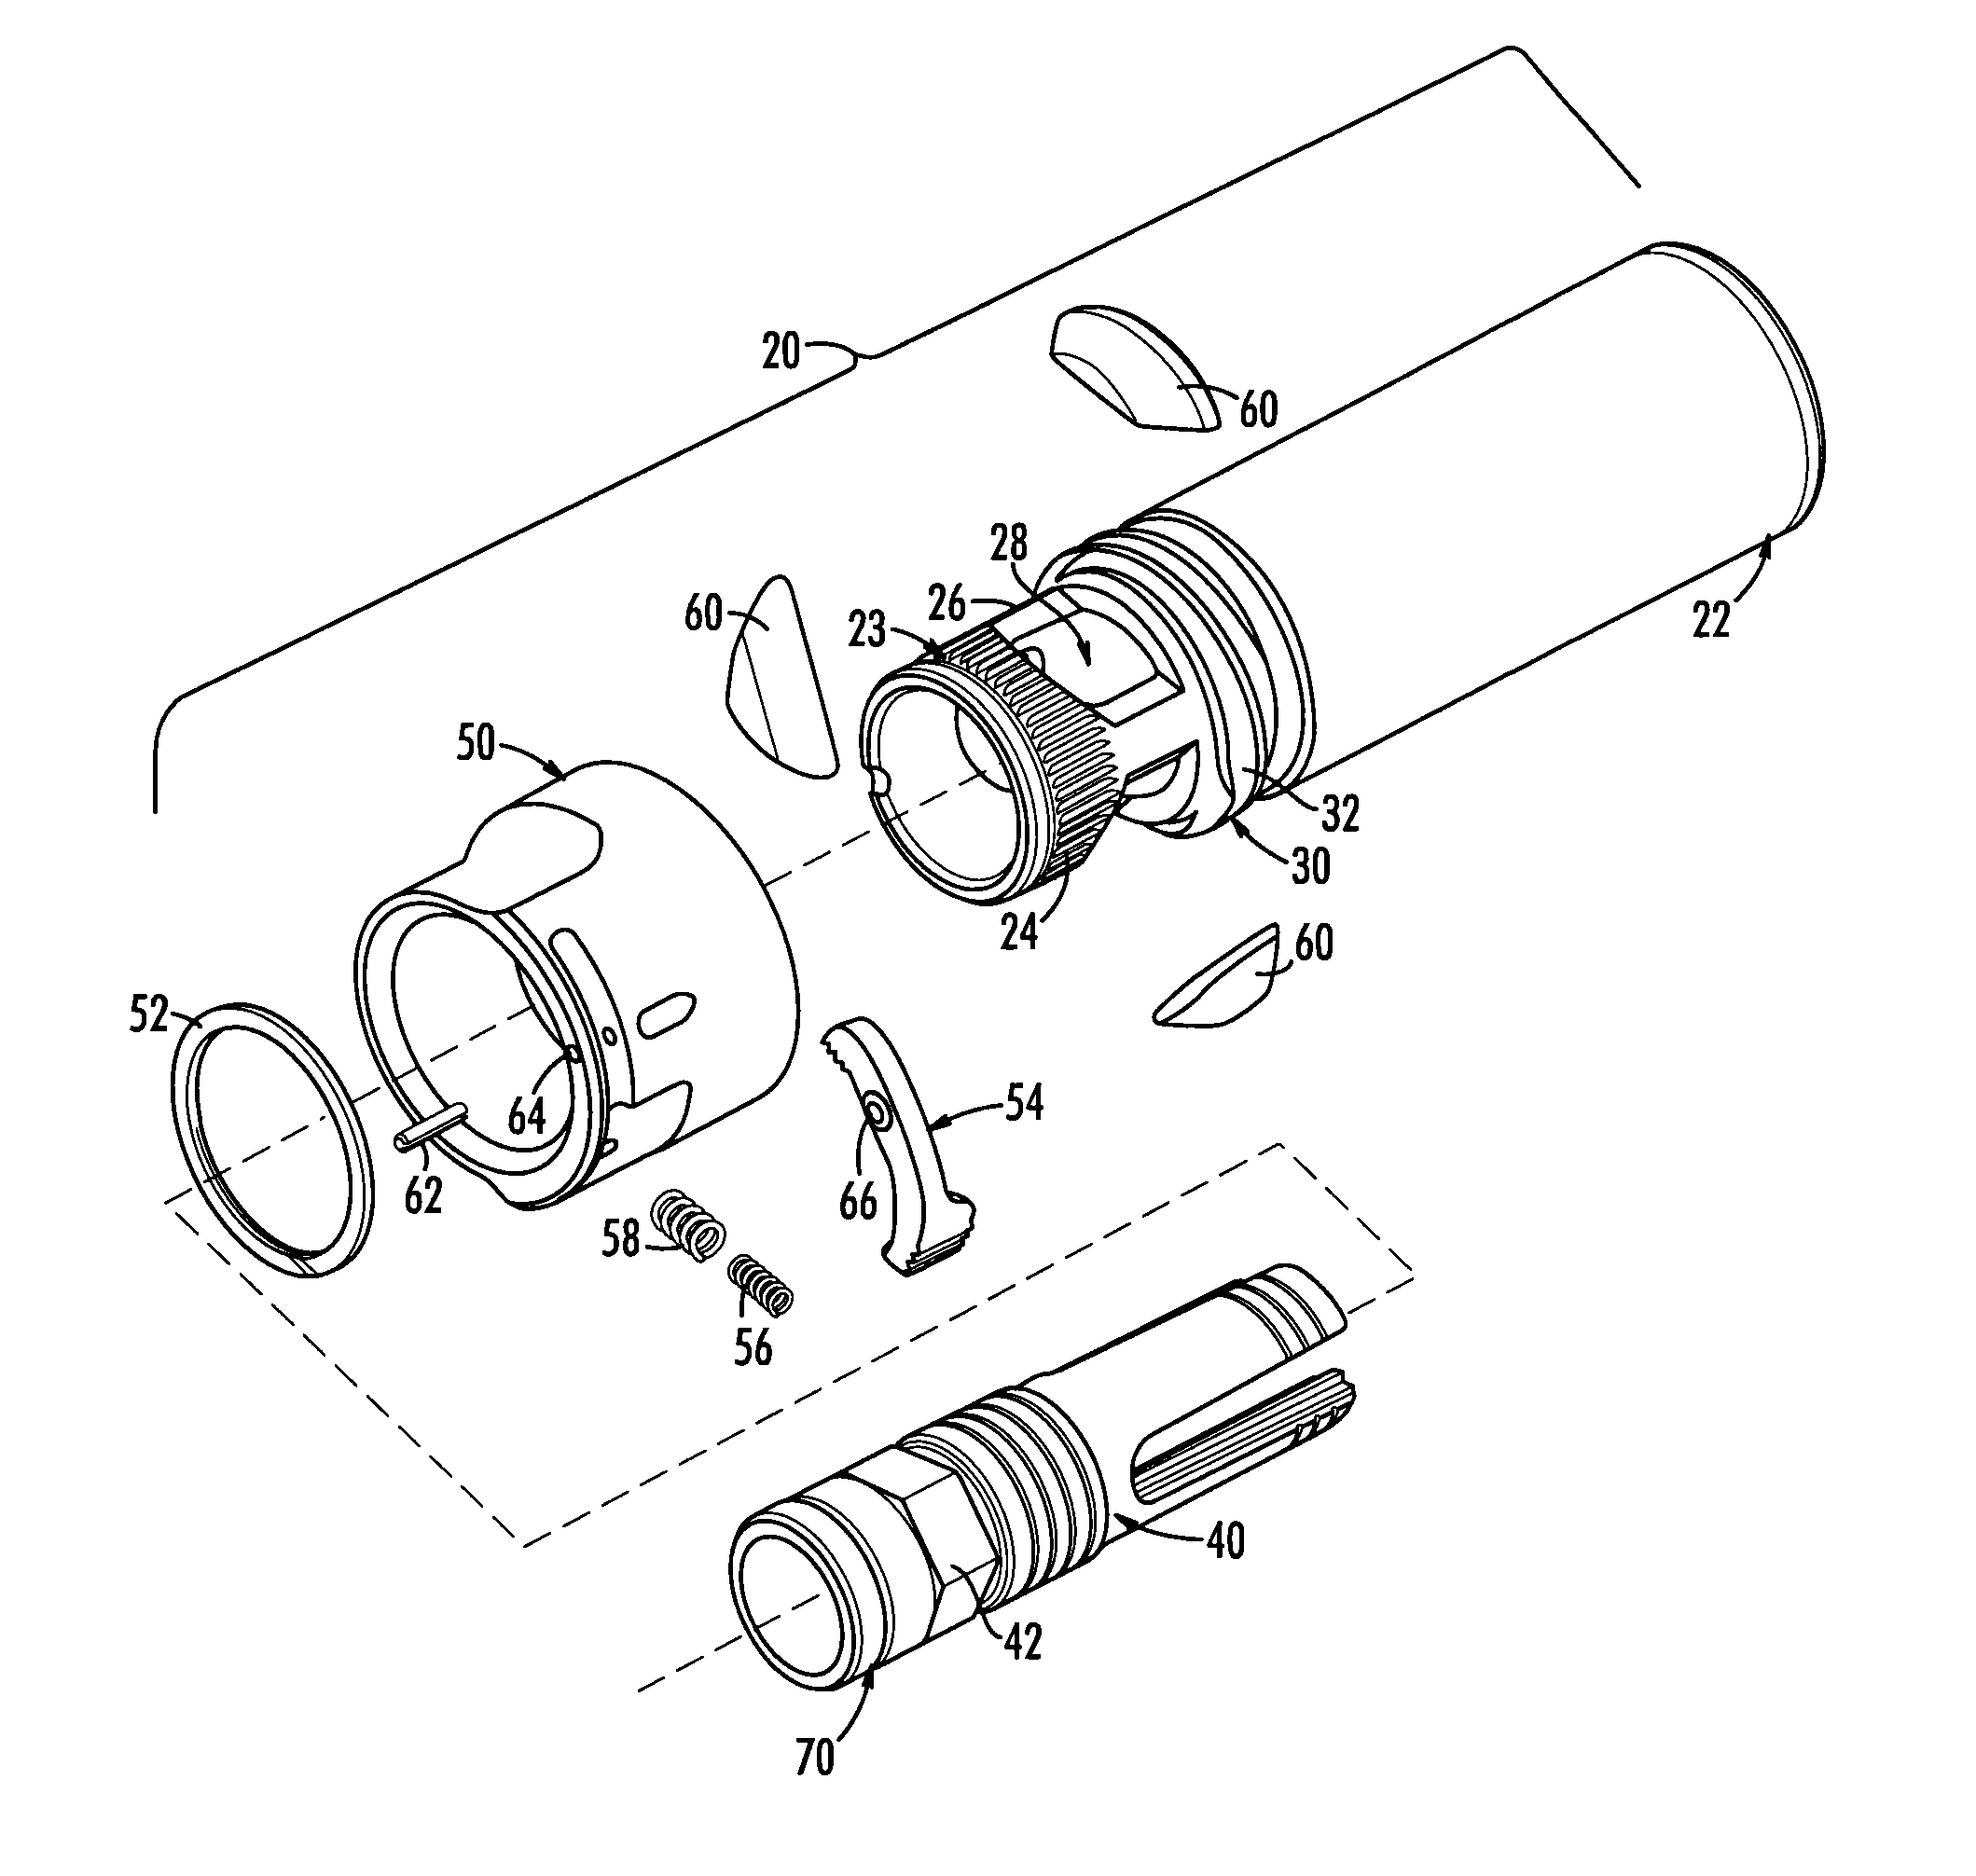 Coupler system for attaching blank adaptor and the like to a flash hider